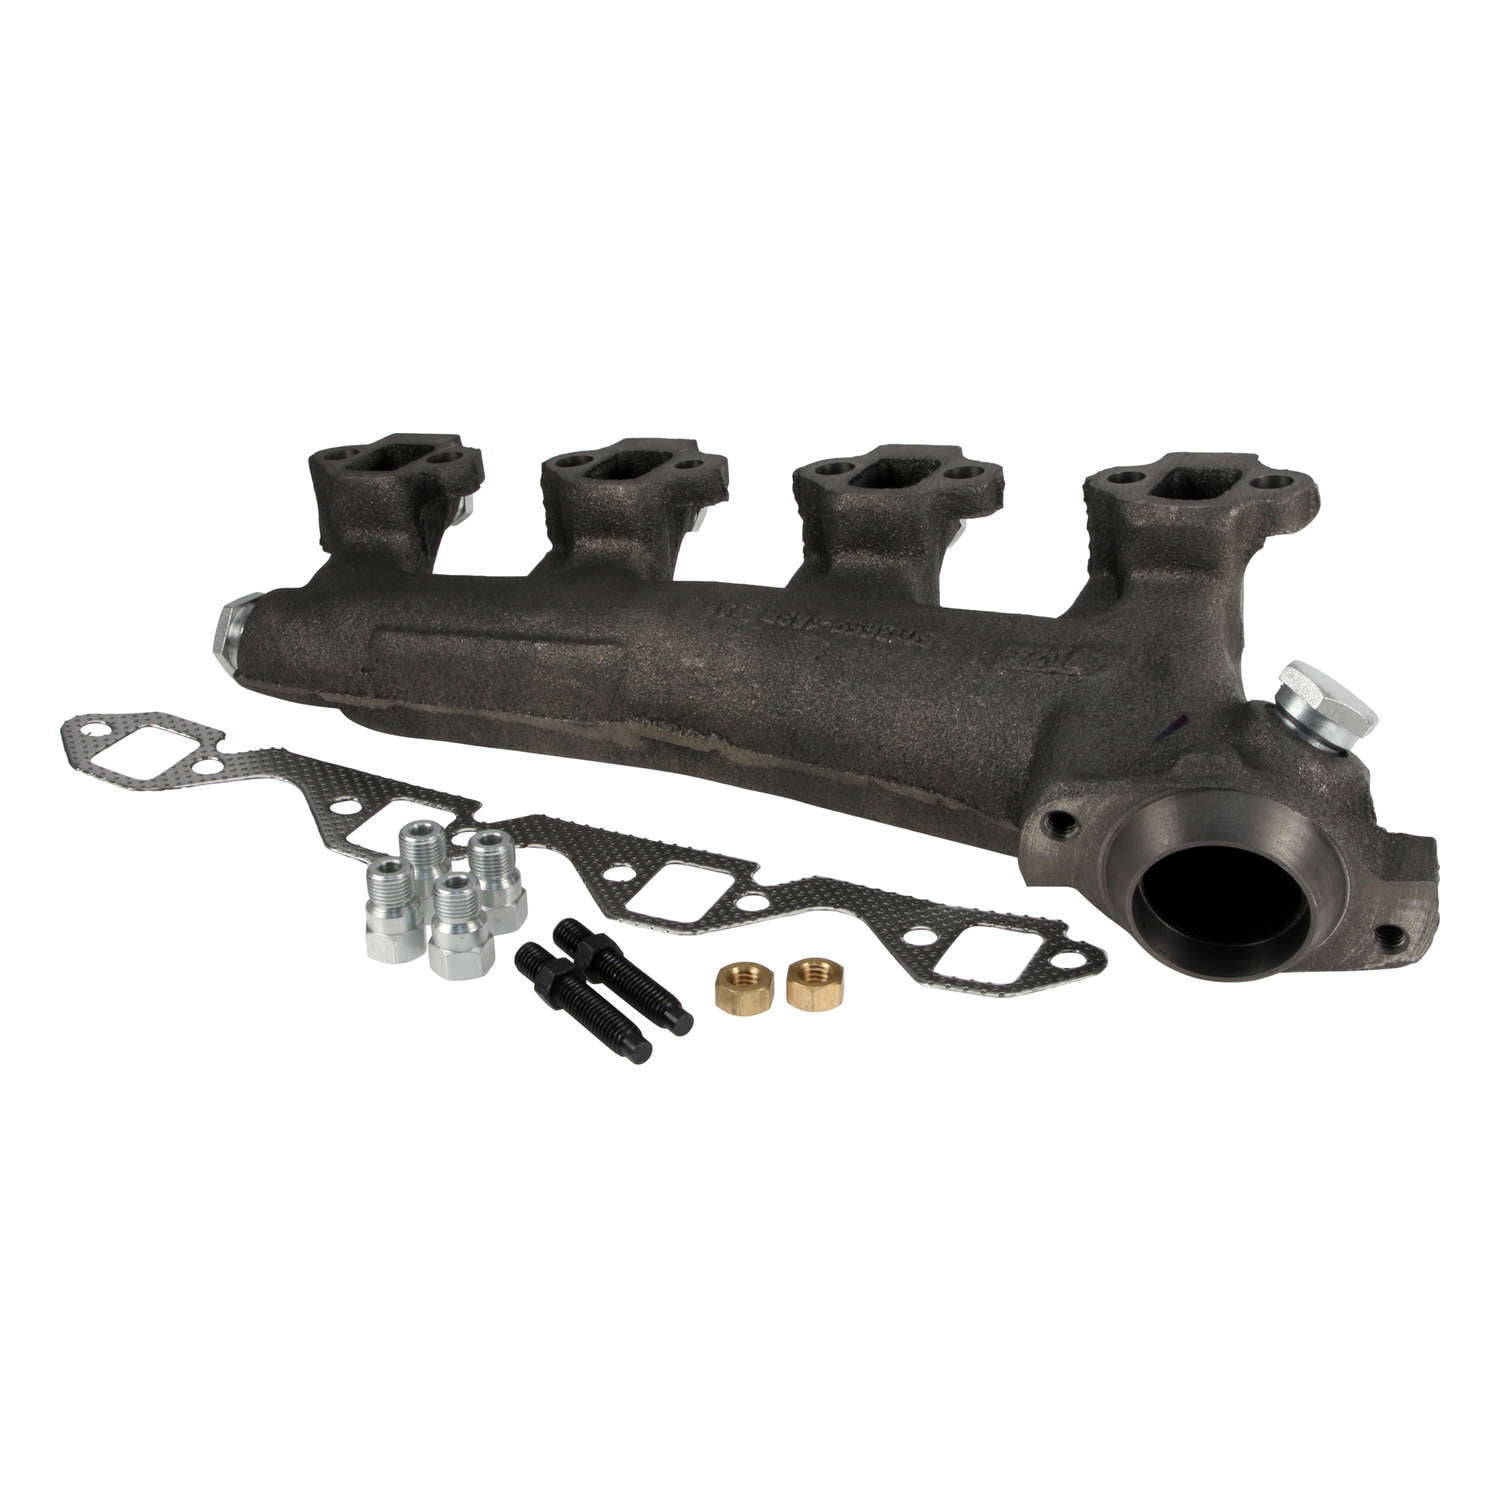 Dorman 674-165 Passenger Side Exhaust Manifold Kit Includes Required  Gaskets and Hardware Compatible with Select Ford Models Fits select:  1988-1996 FORD F150, 1988-1997 FORD F250